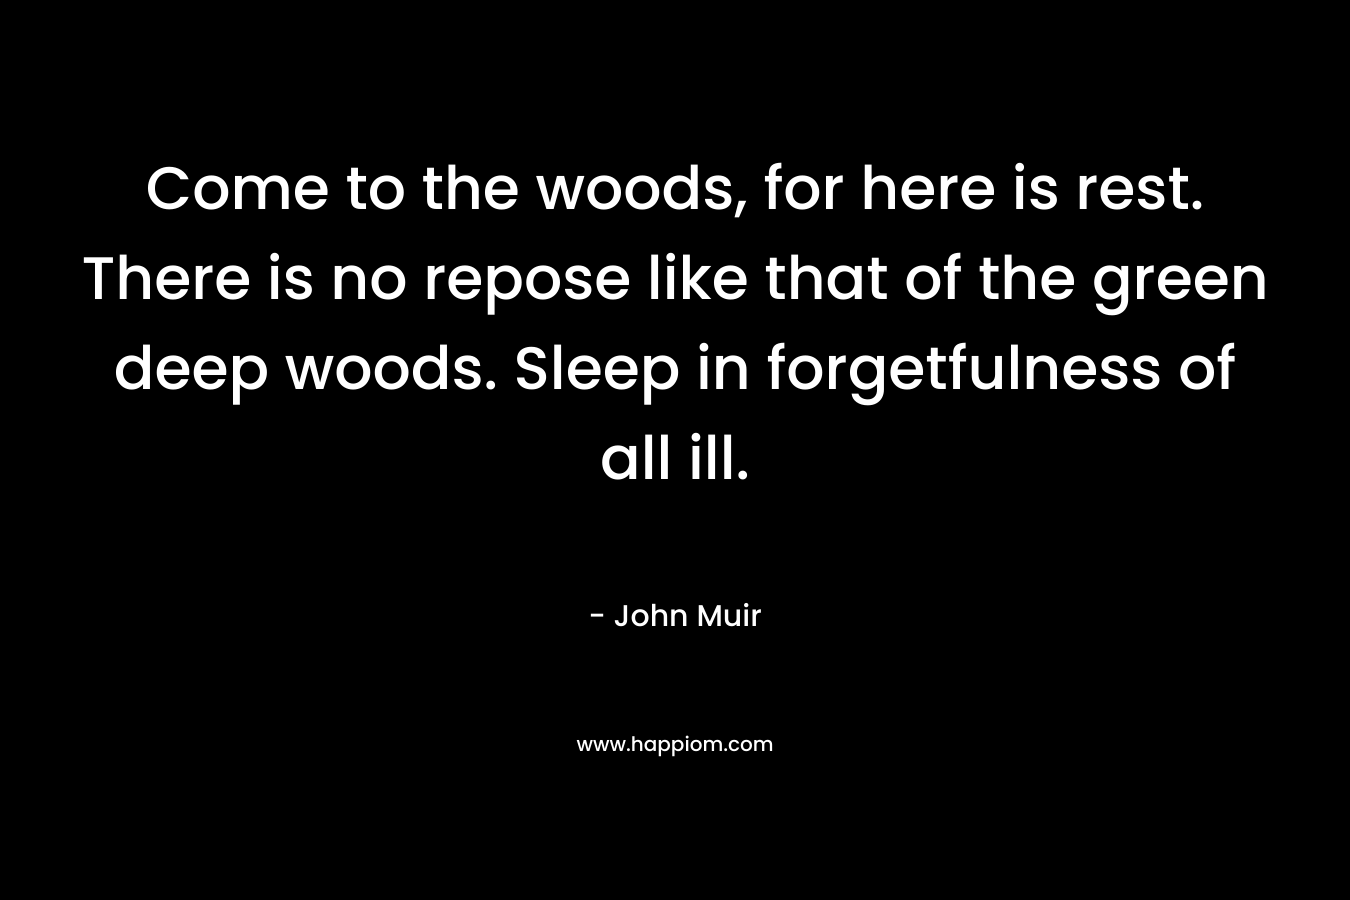 Come to the woods, for here is rest. There is no repose like that of the green deep woods. Sleep in forgetfulness of all ill. – John Muir